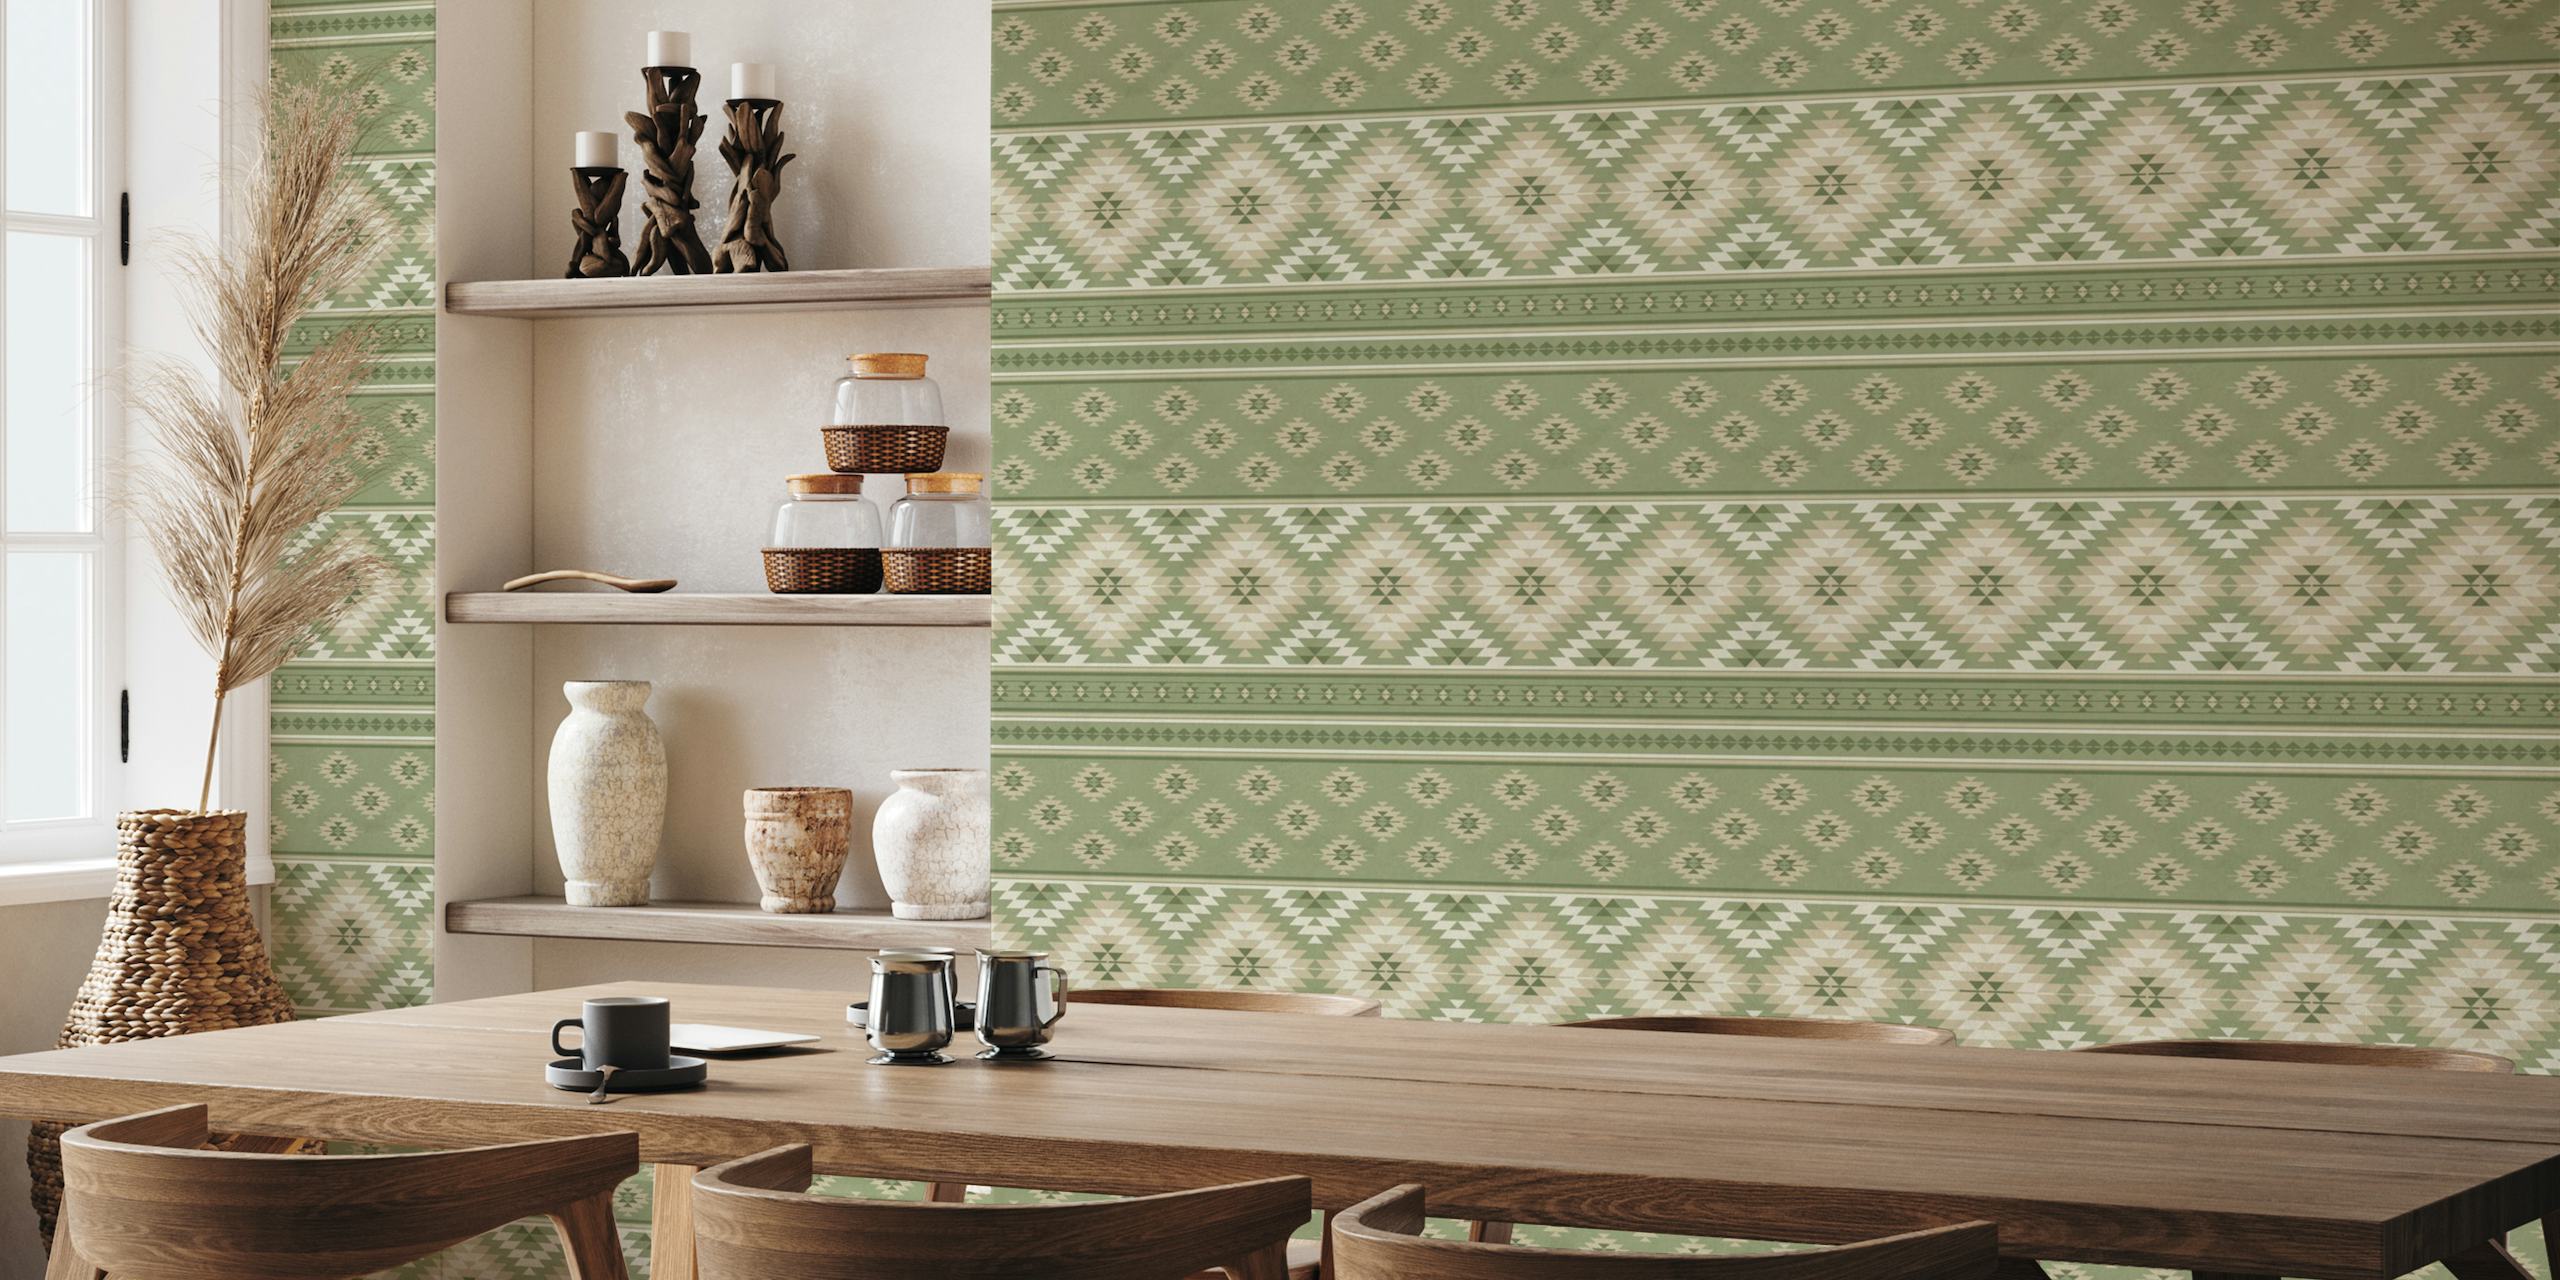 Kilim Stripes wall mural in olive sage green and beige with geometric patterns